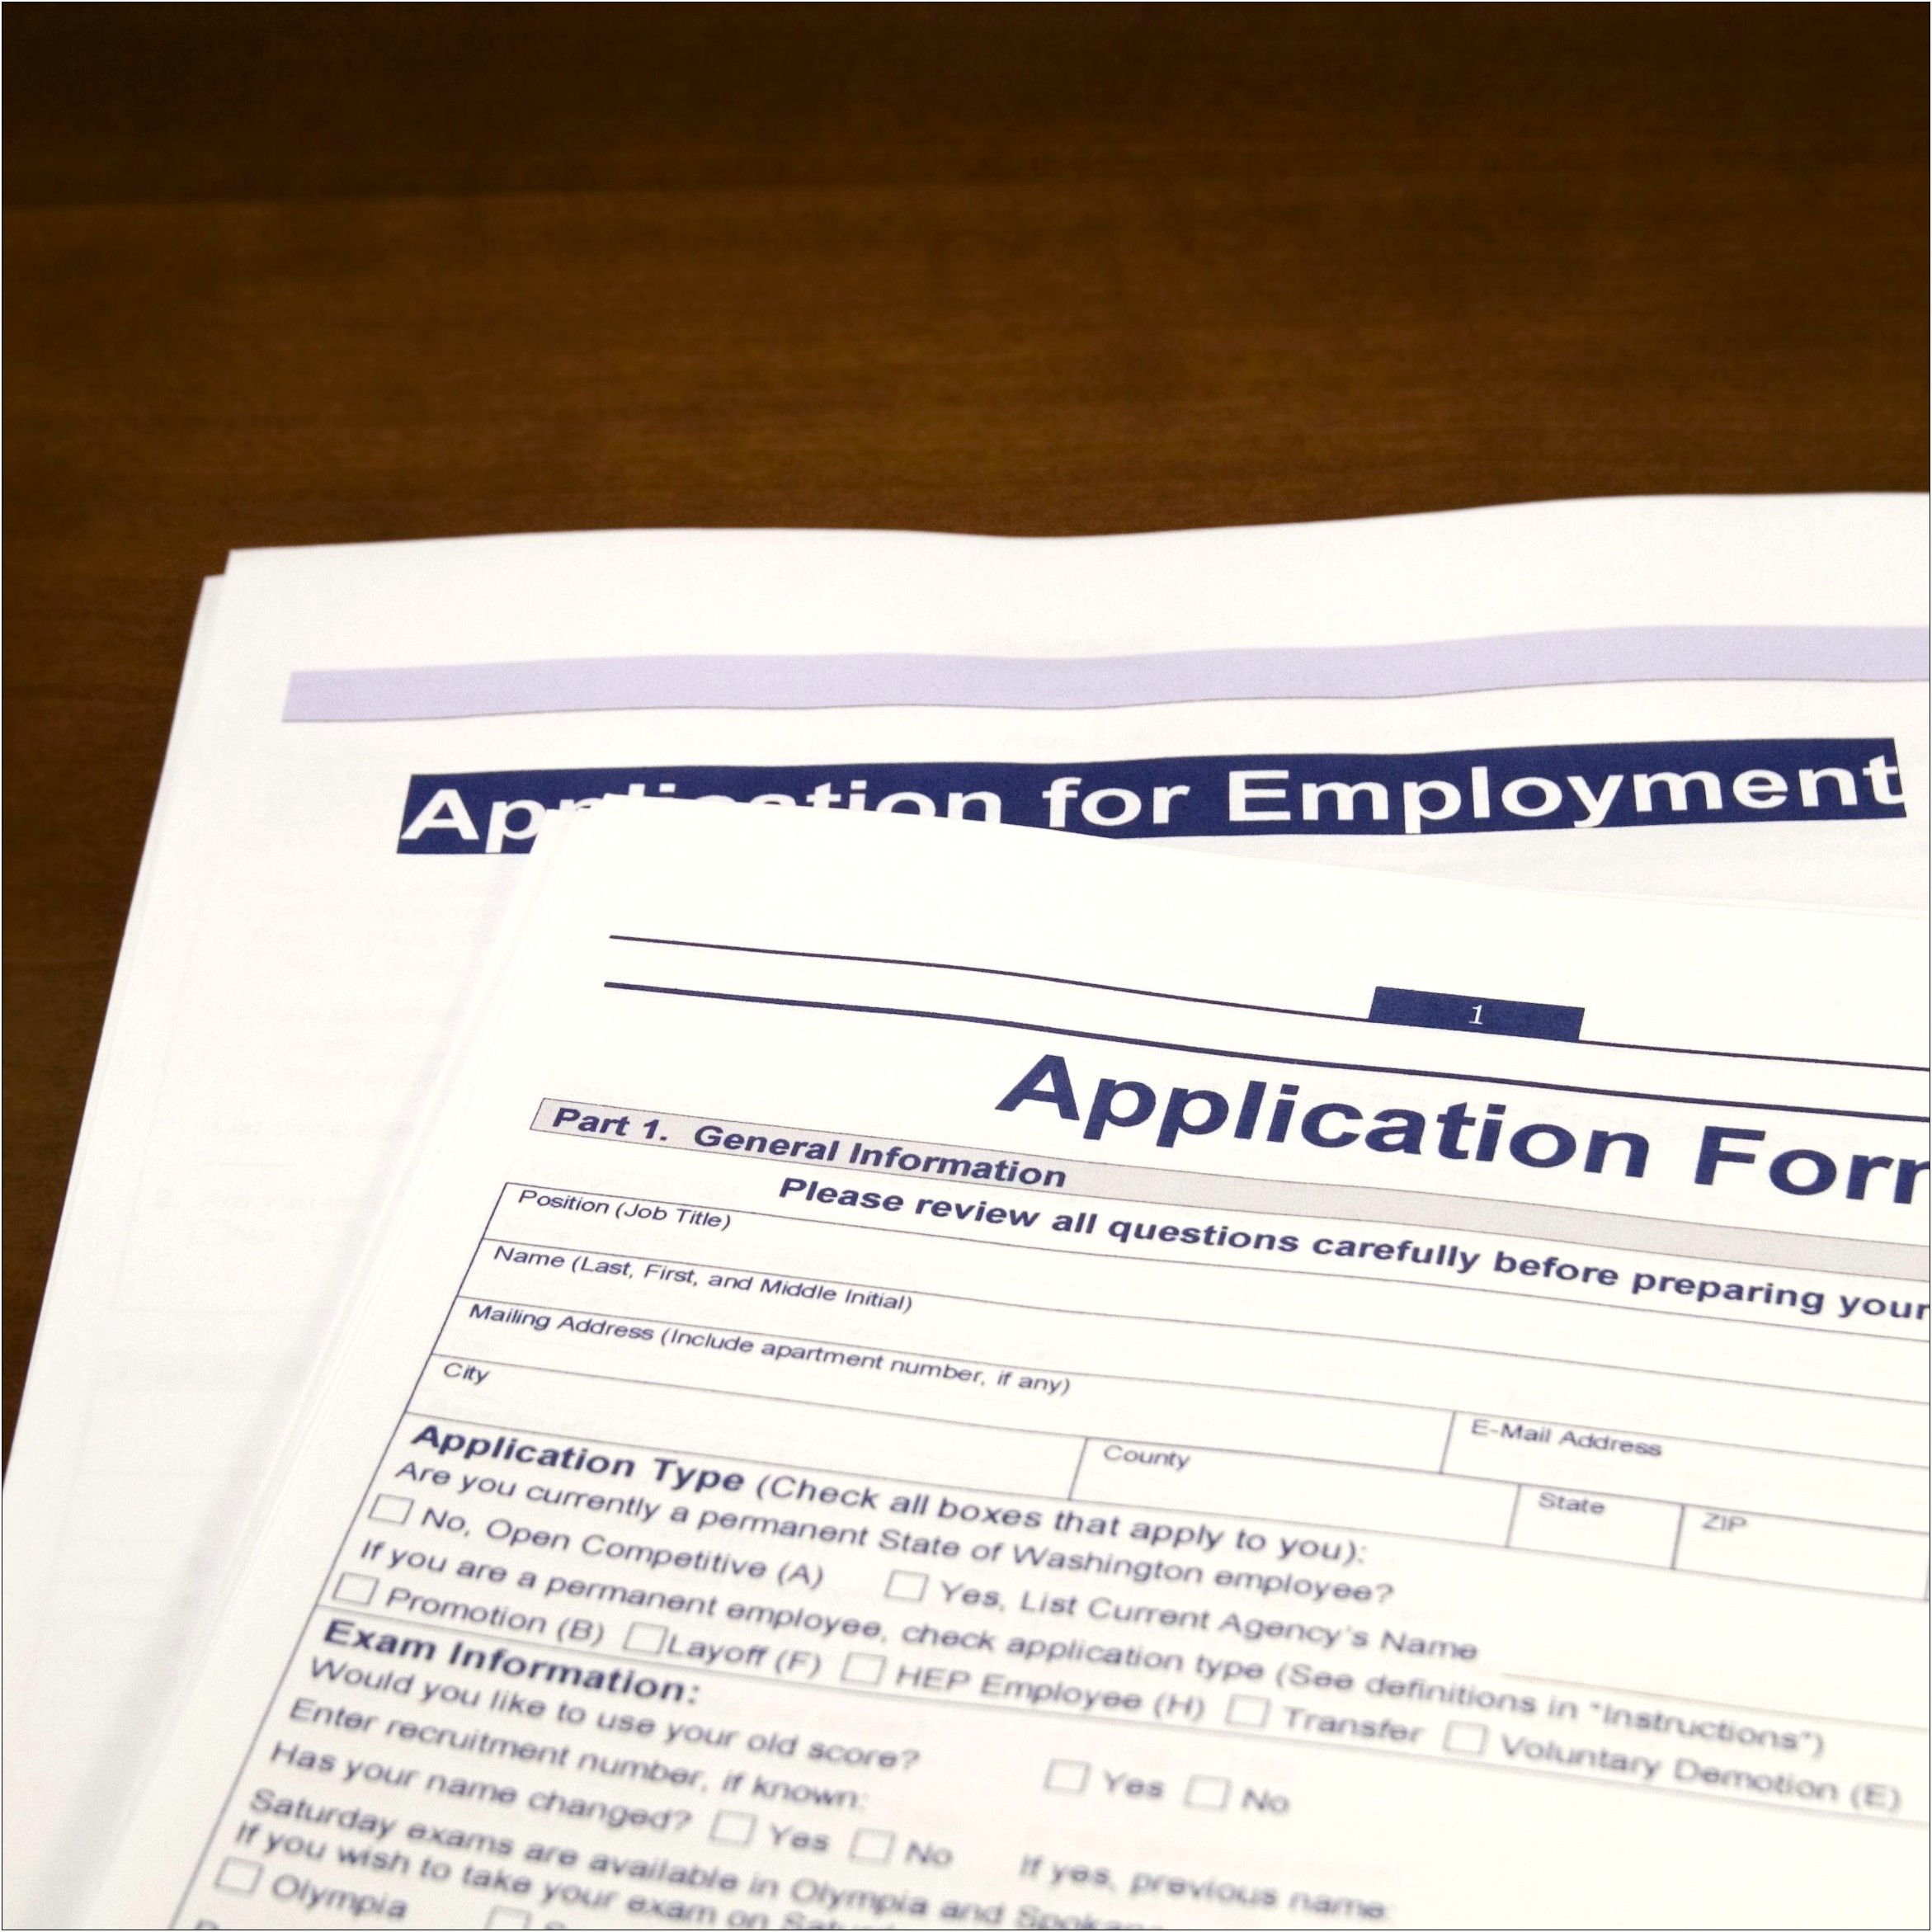 Does Your Resume Include Work History Dates